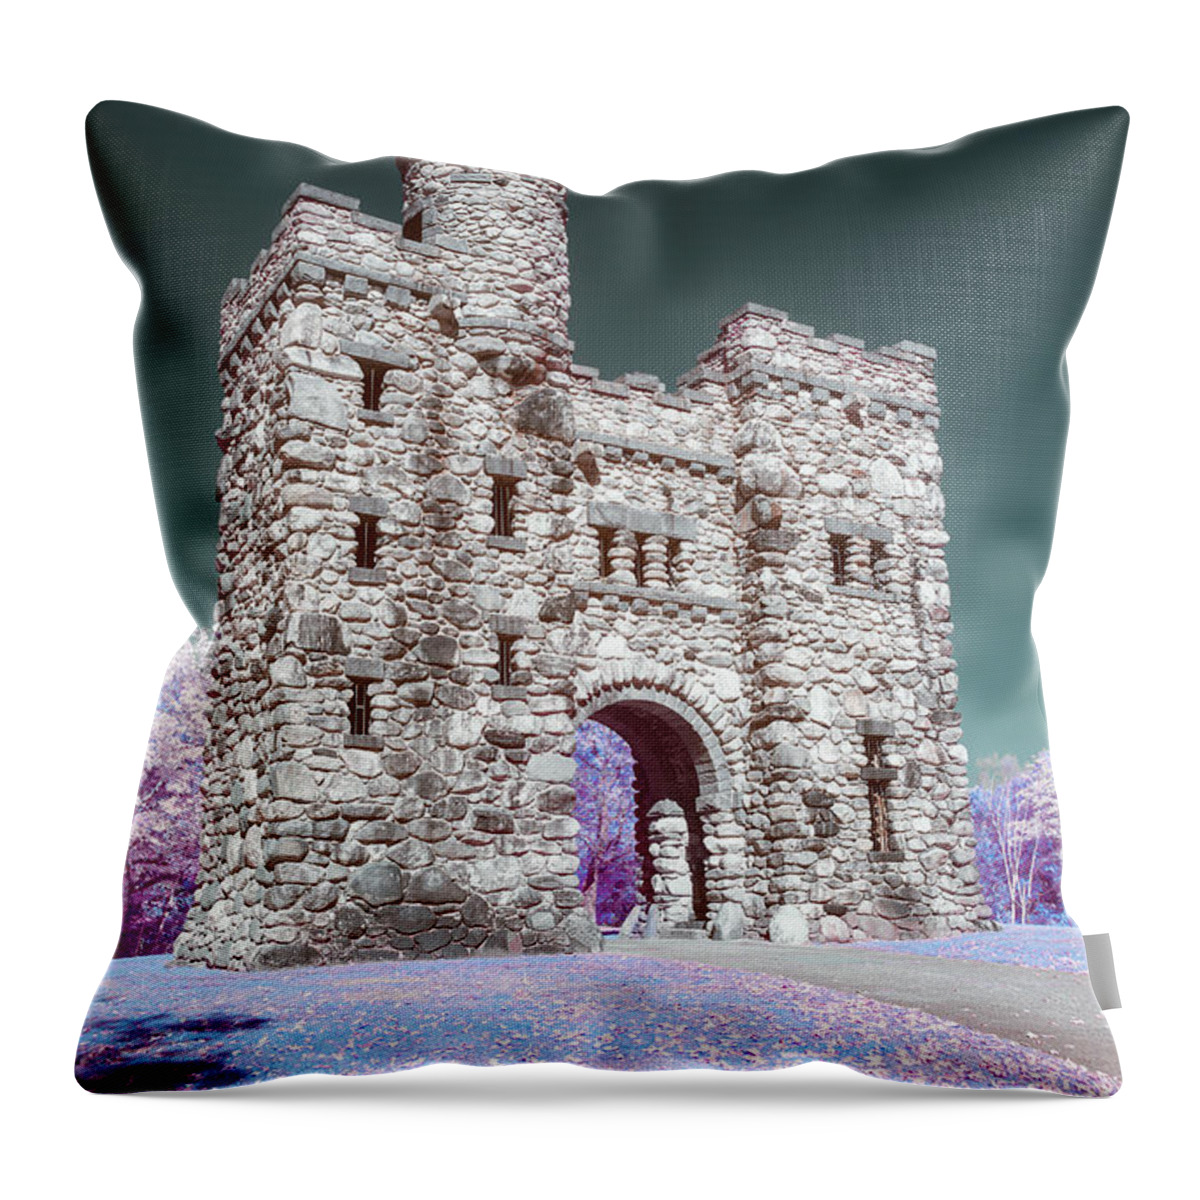 Bancroft Tower Worcester Ma Mass Massachusetts Newengland New England Usa U.s.a. 590nm Ir Infrared Castle Stone Brick Sun Sky Purple Brian Hale Brianhalephoto Throw Pillow featuring the photograph Bancroft Tower IR 2 by Brian Hale